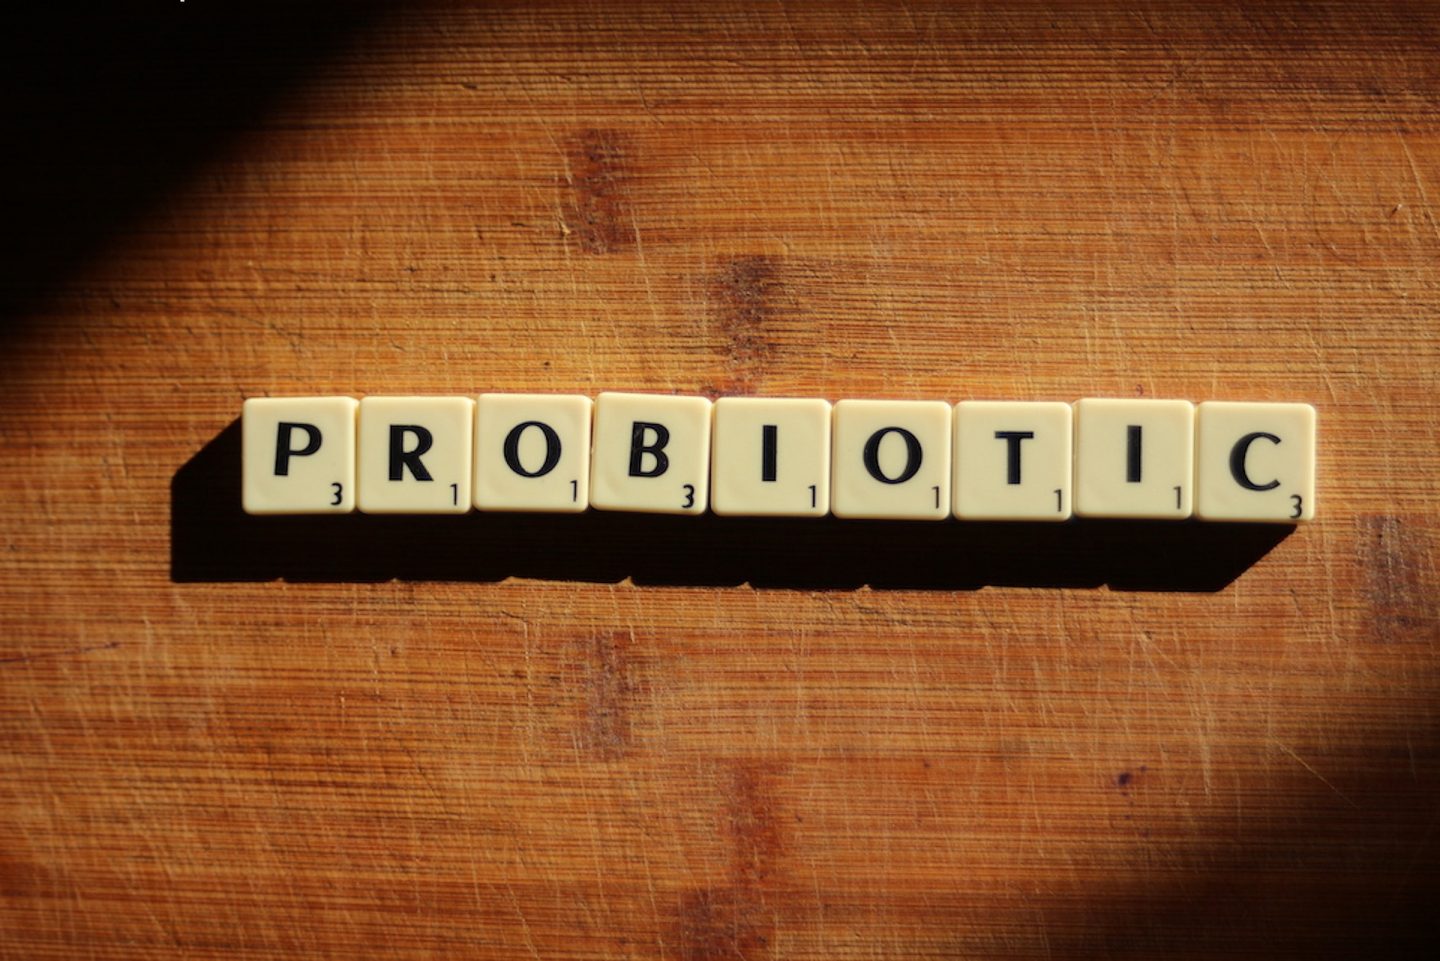 Benefits of a Probiotic | Sustainable Living with HarassedMom